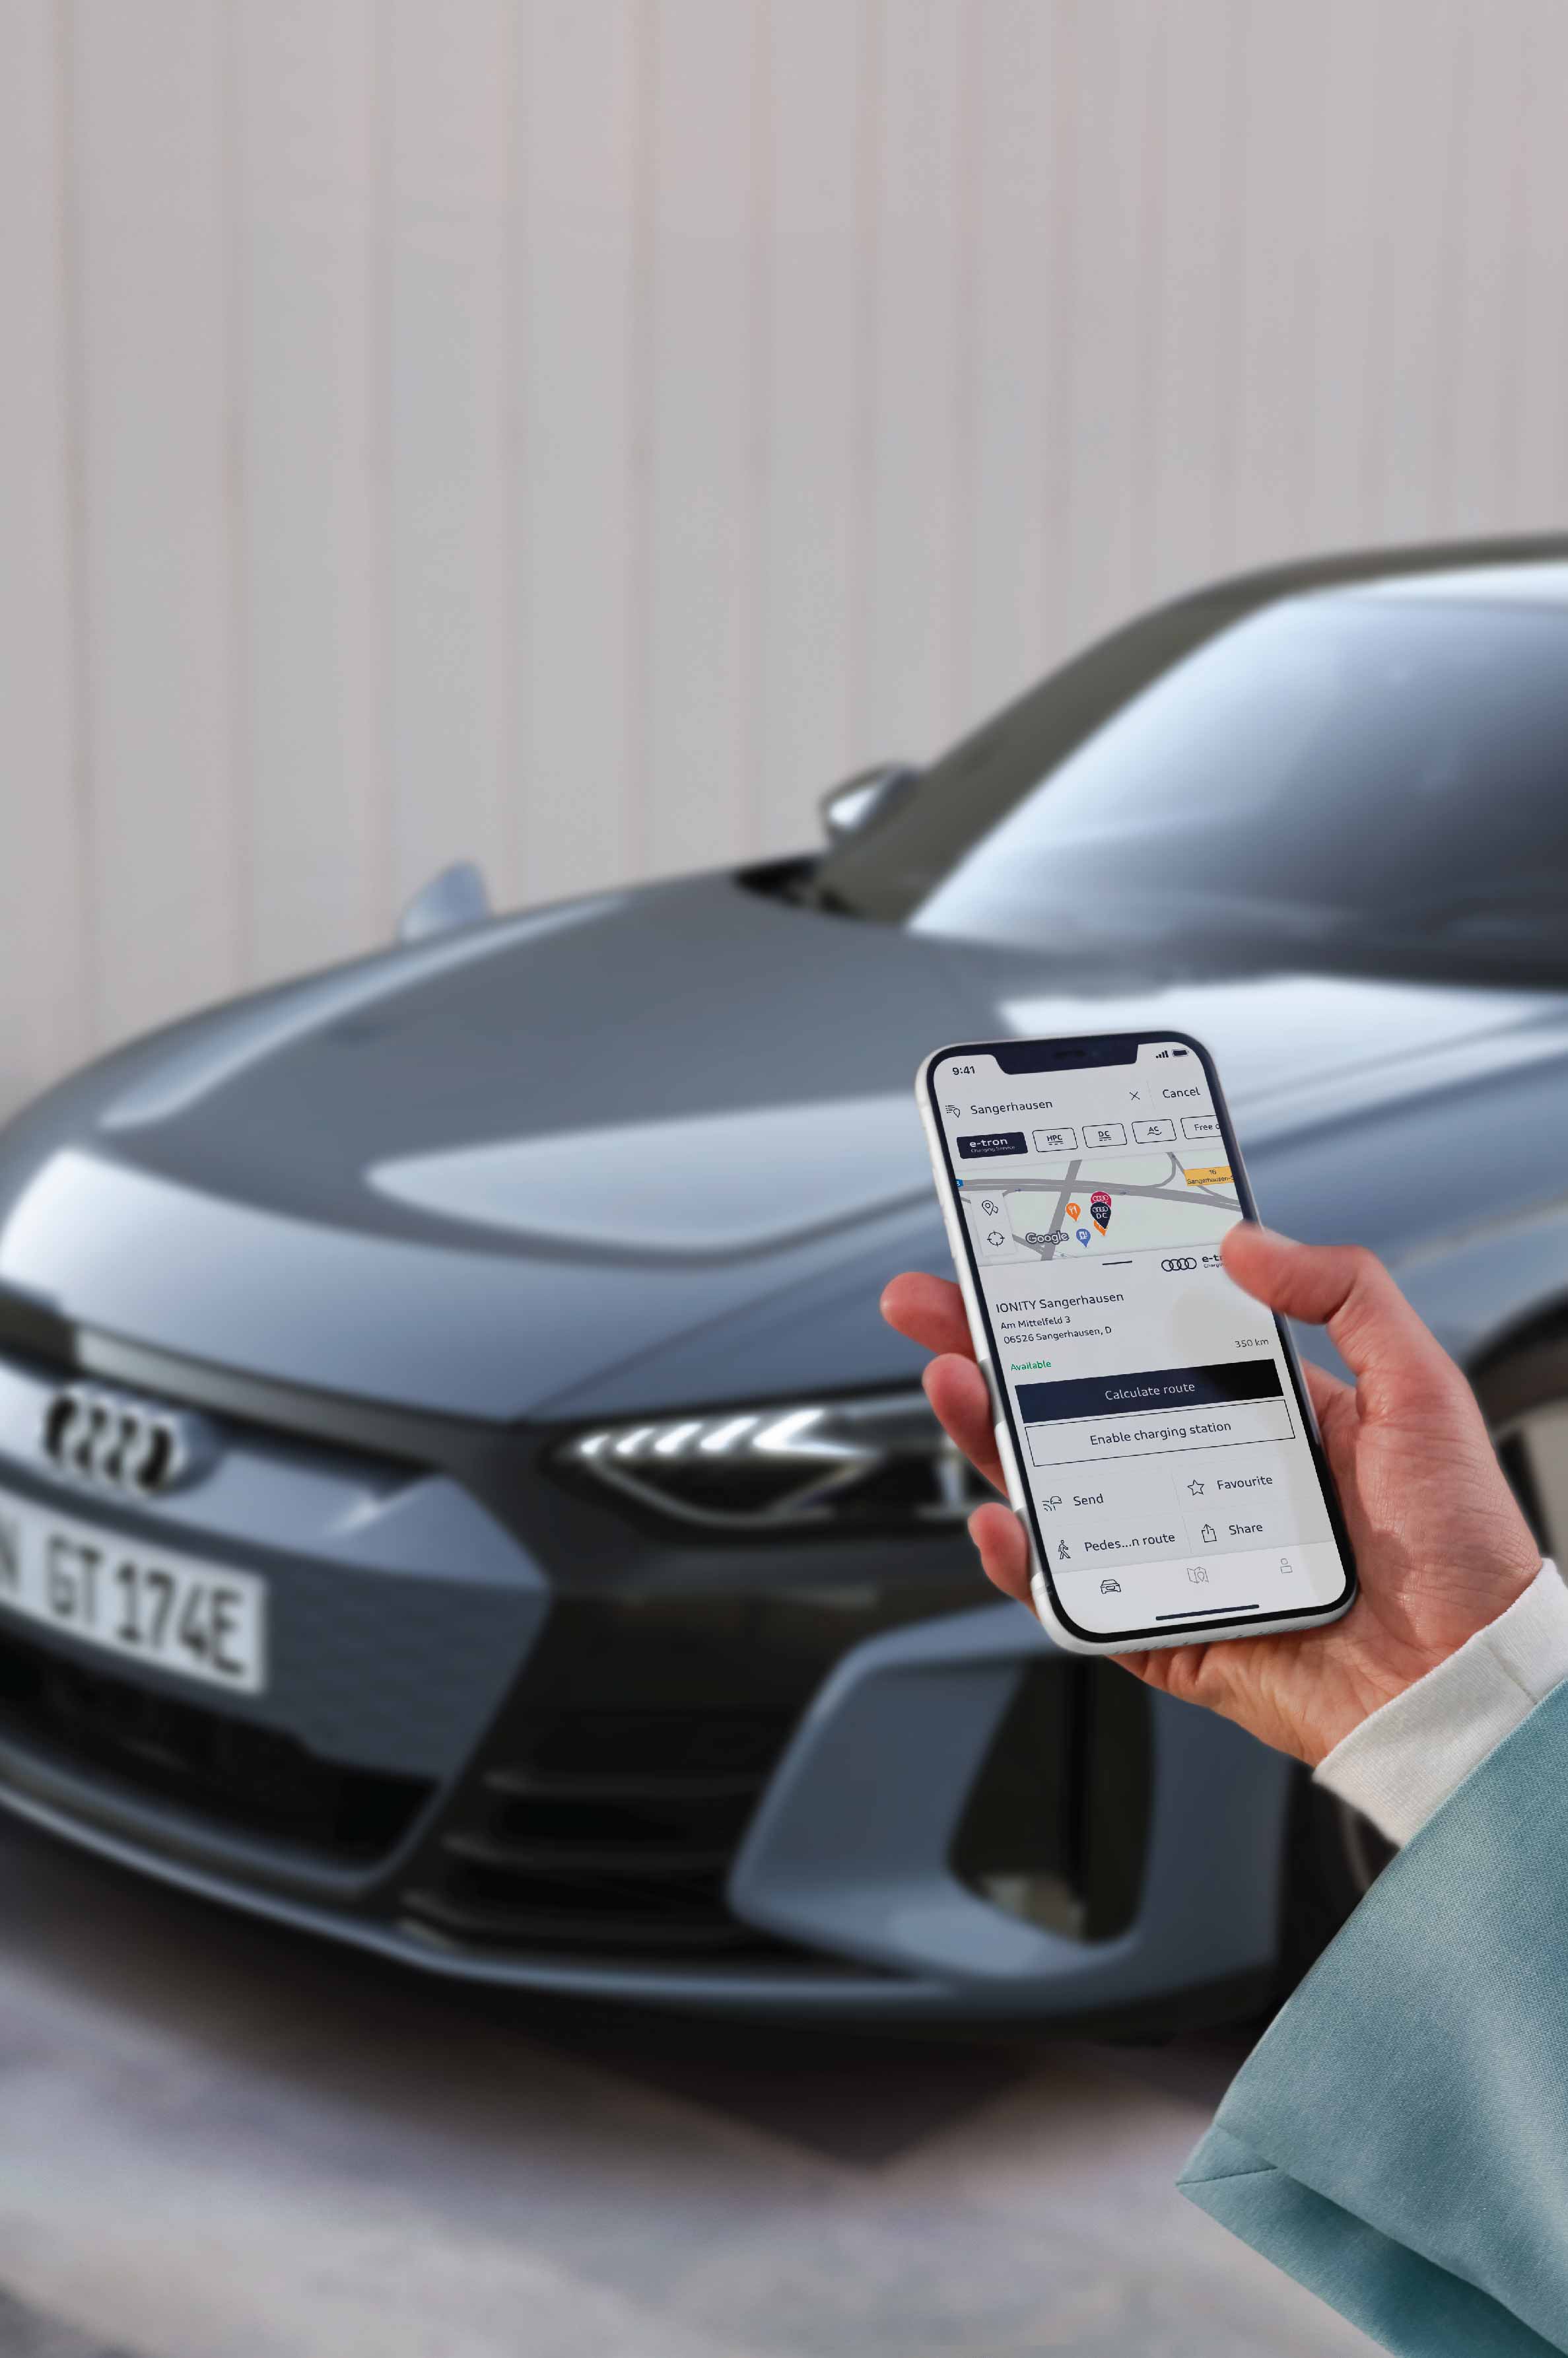 Get access to your Audi remotely